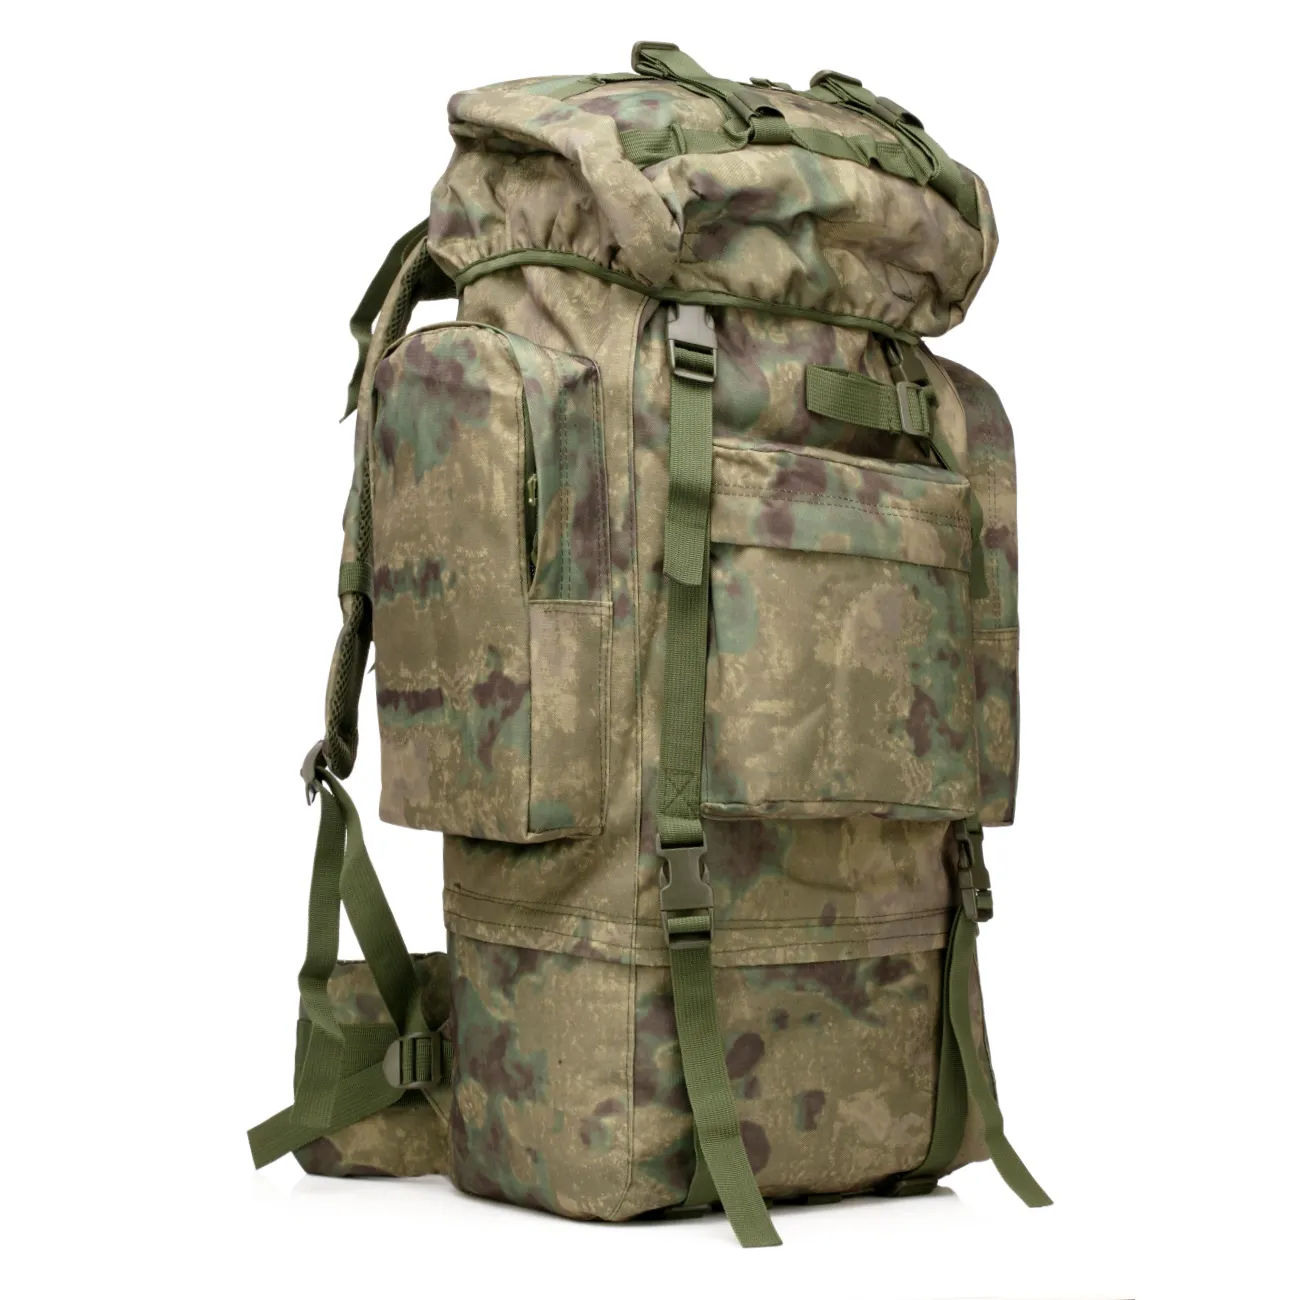 Tactical Bag Military Backpack Chenhao 70L Capacity Climb Hiking Back Pack Rain Cover Bags Internal Frame Mountaineering Tactical Backpack